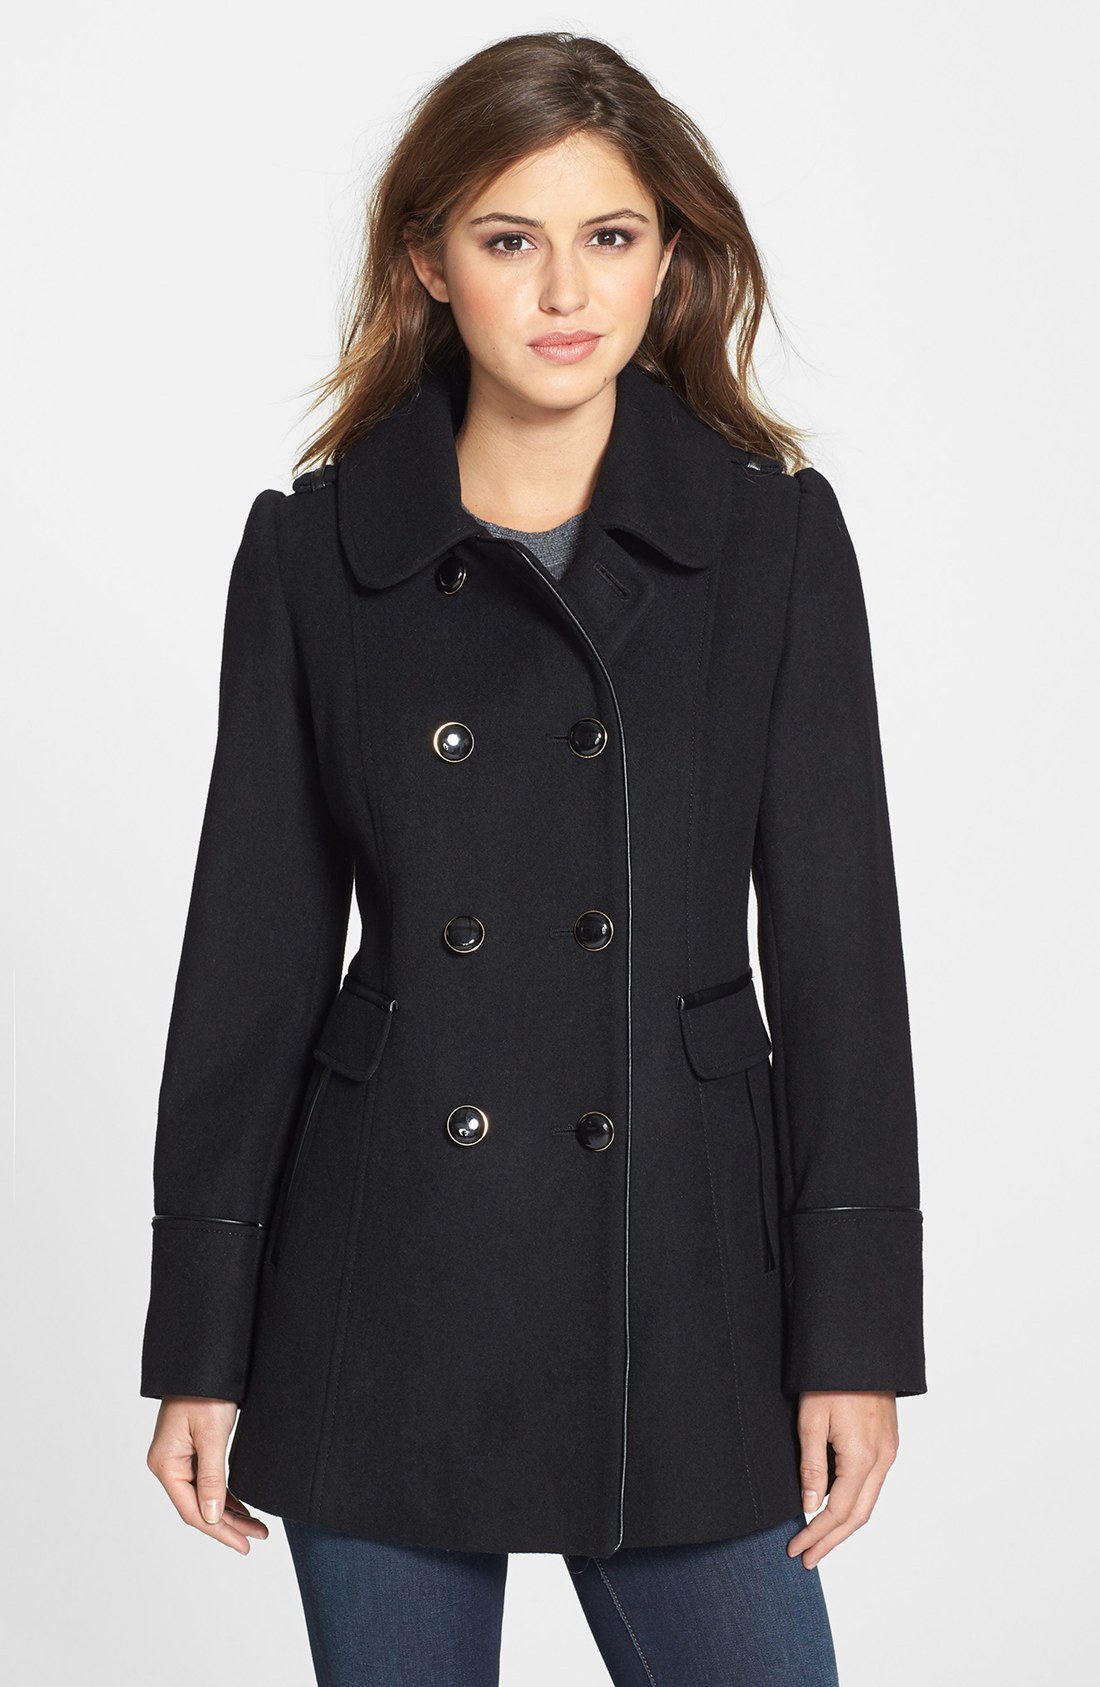 Kensie Double Breasted Wool Blend Coat with Faux Leather Trim in Black ...